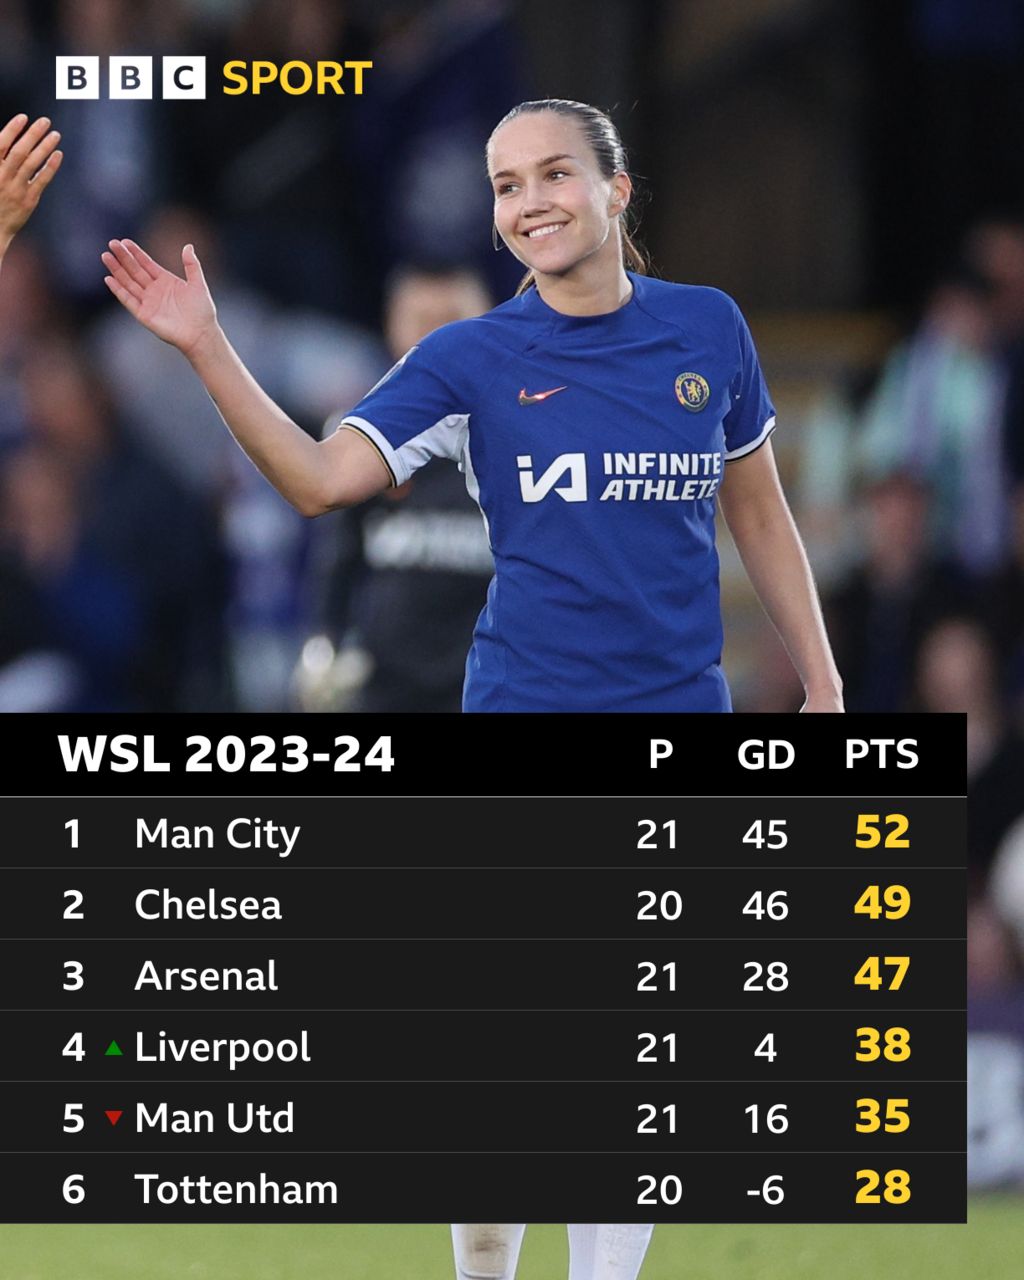 The latest WSL table which shows Manchester City in first and Chelsea second. City have three points more, but Chelsea have a game in hand and have a superior goal difference